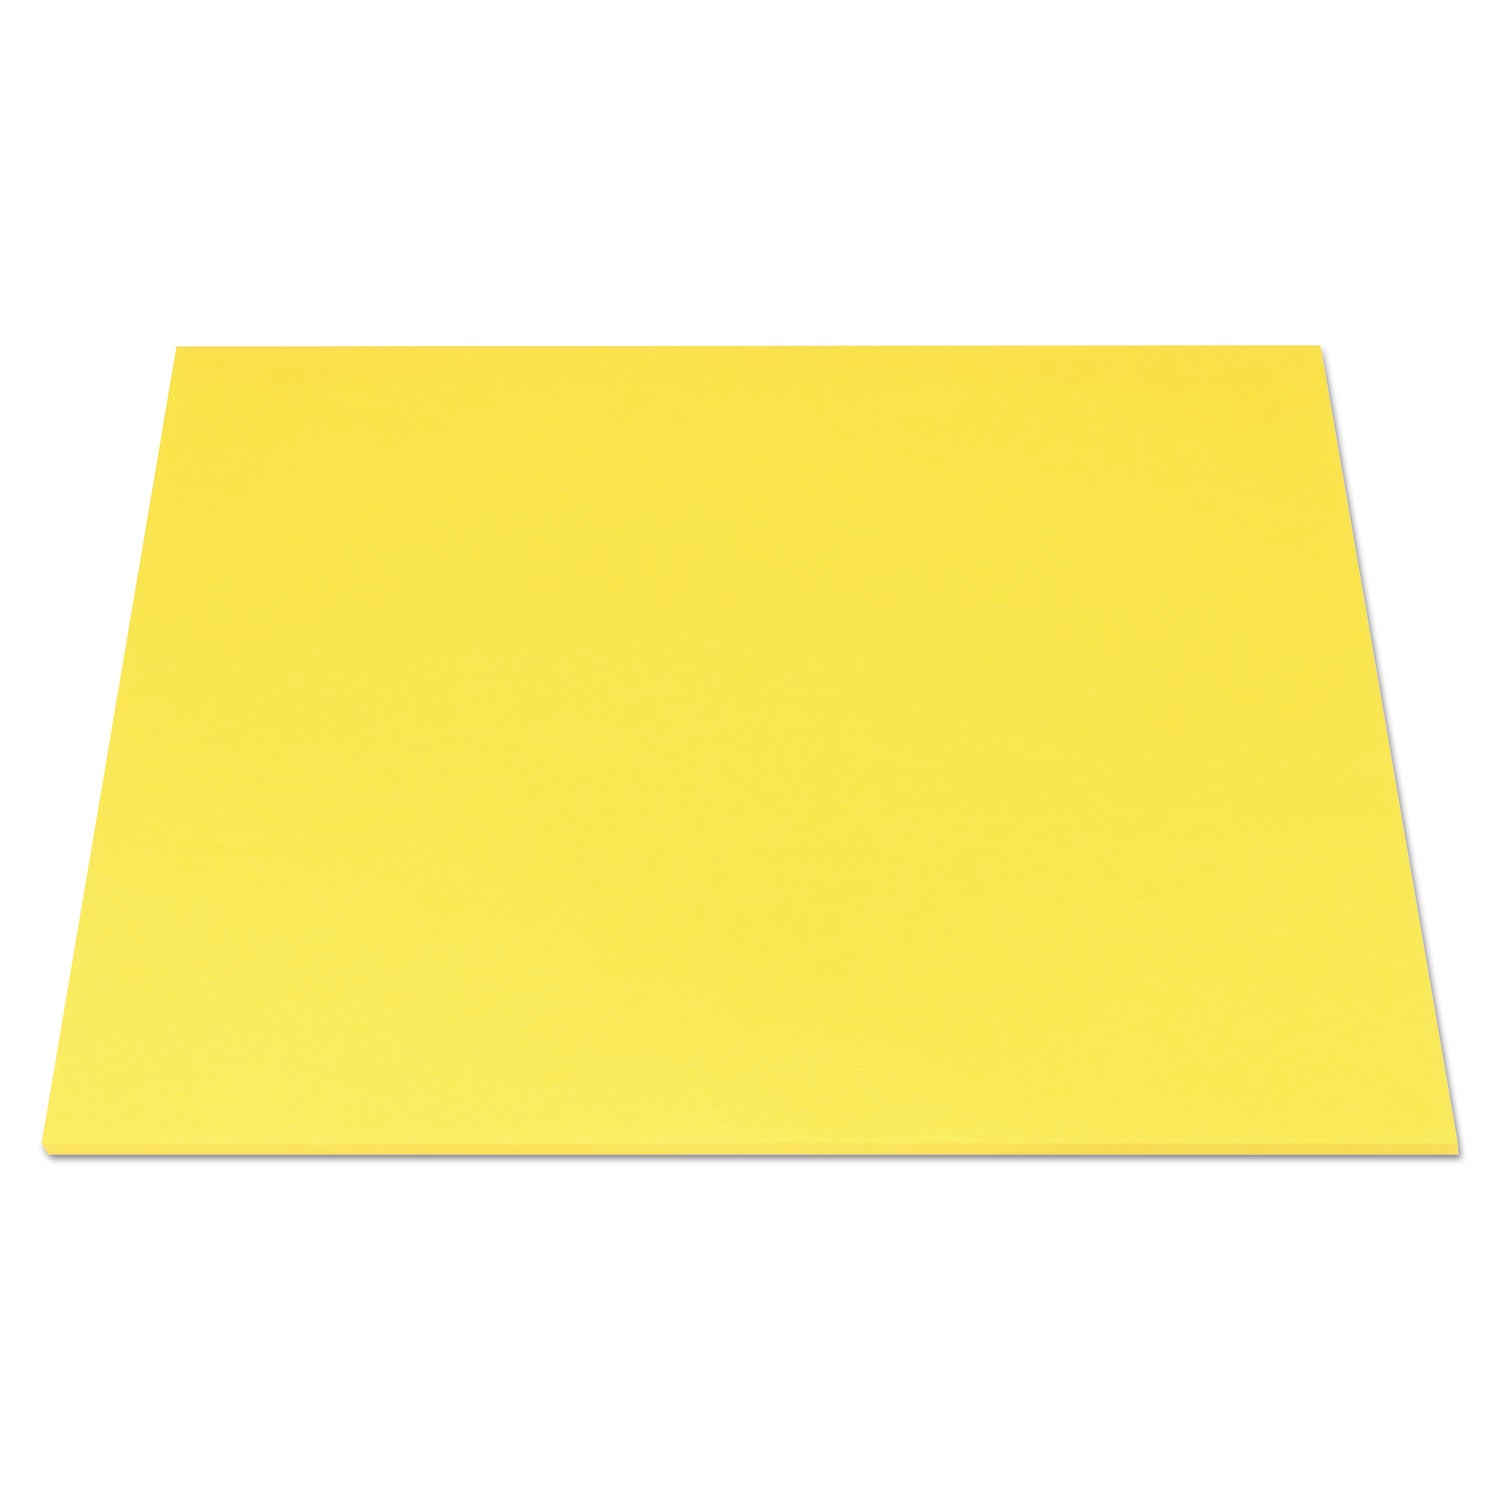 big-notes-unruled-11-x-11-yellow-30-sheets_mmmbn11 - 6